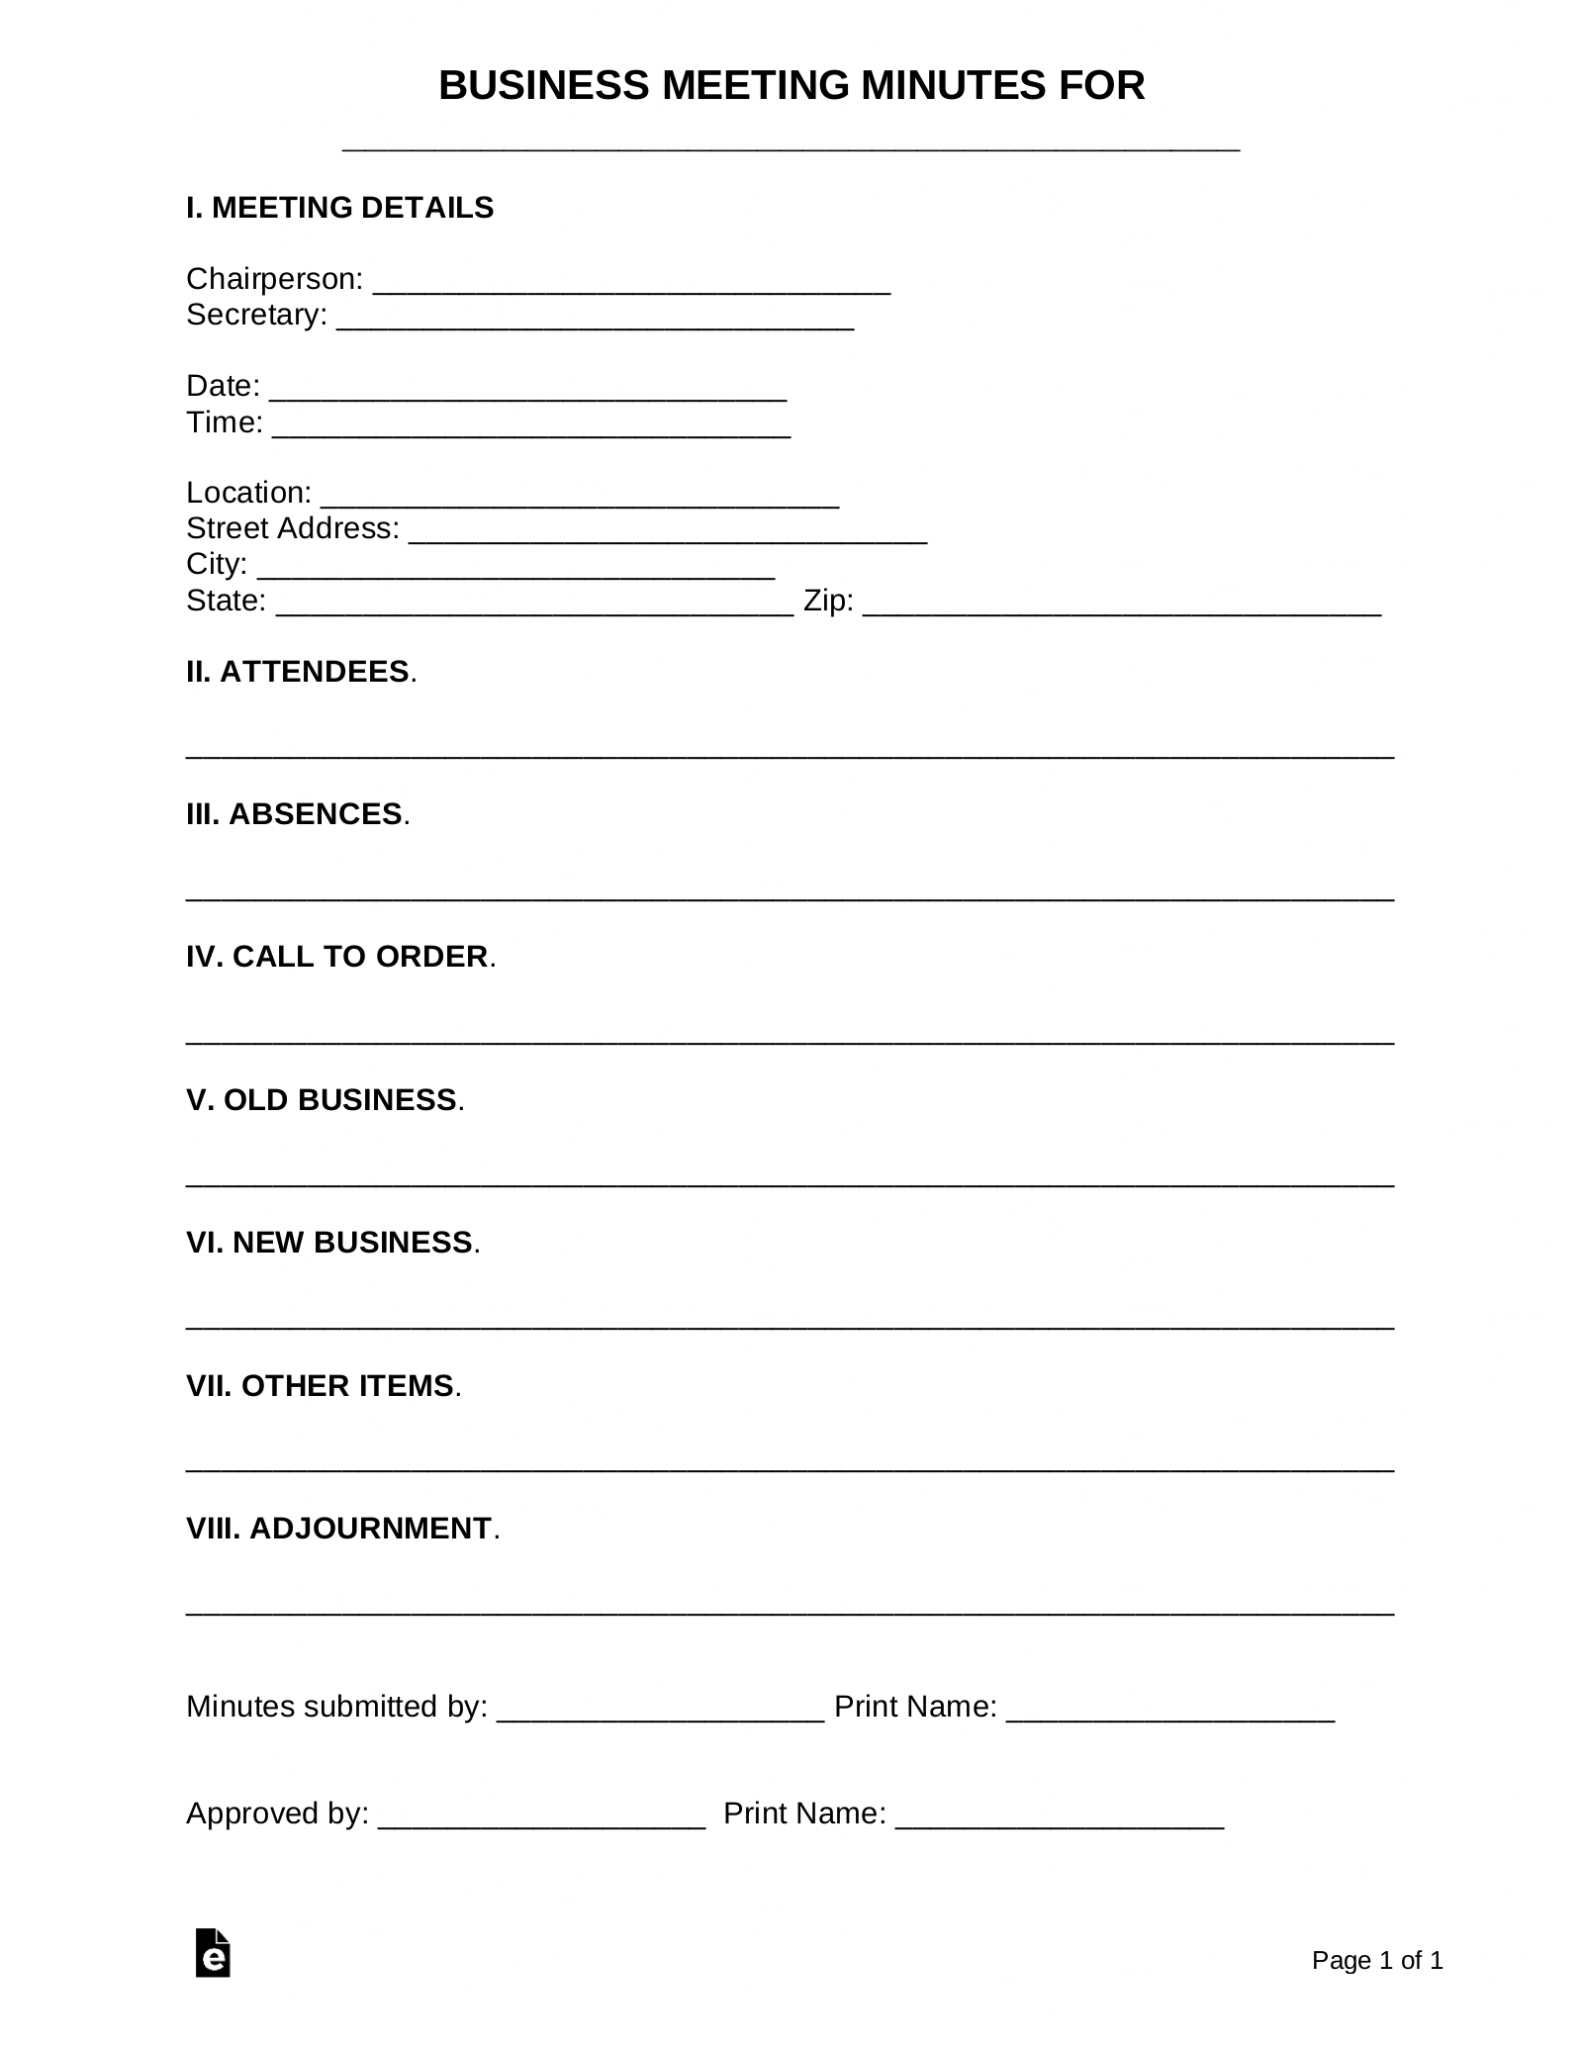 free-business-meeting-minutes-template-sample-pdf-word-eforms